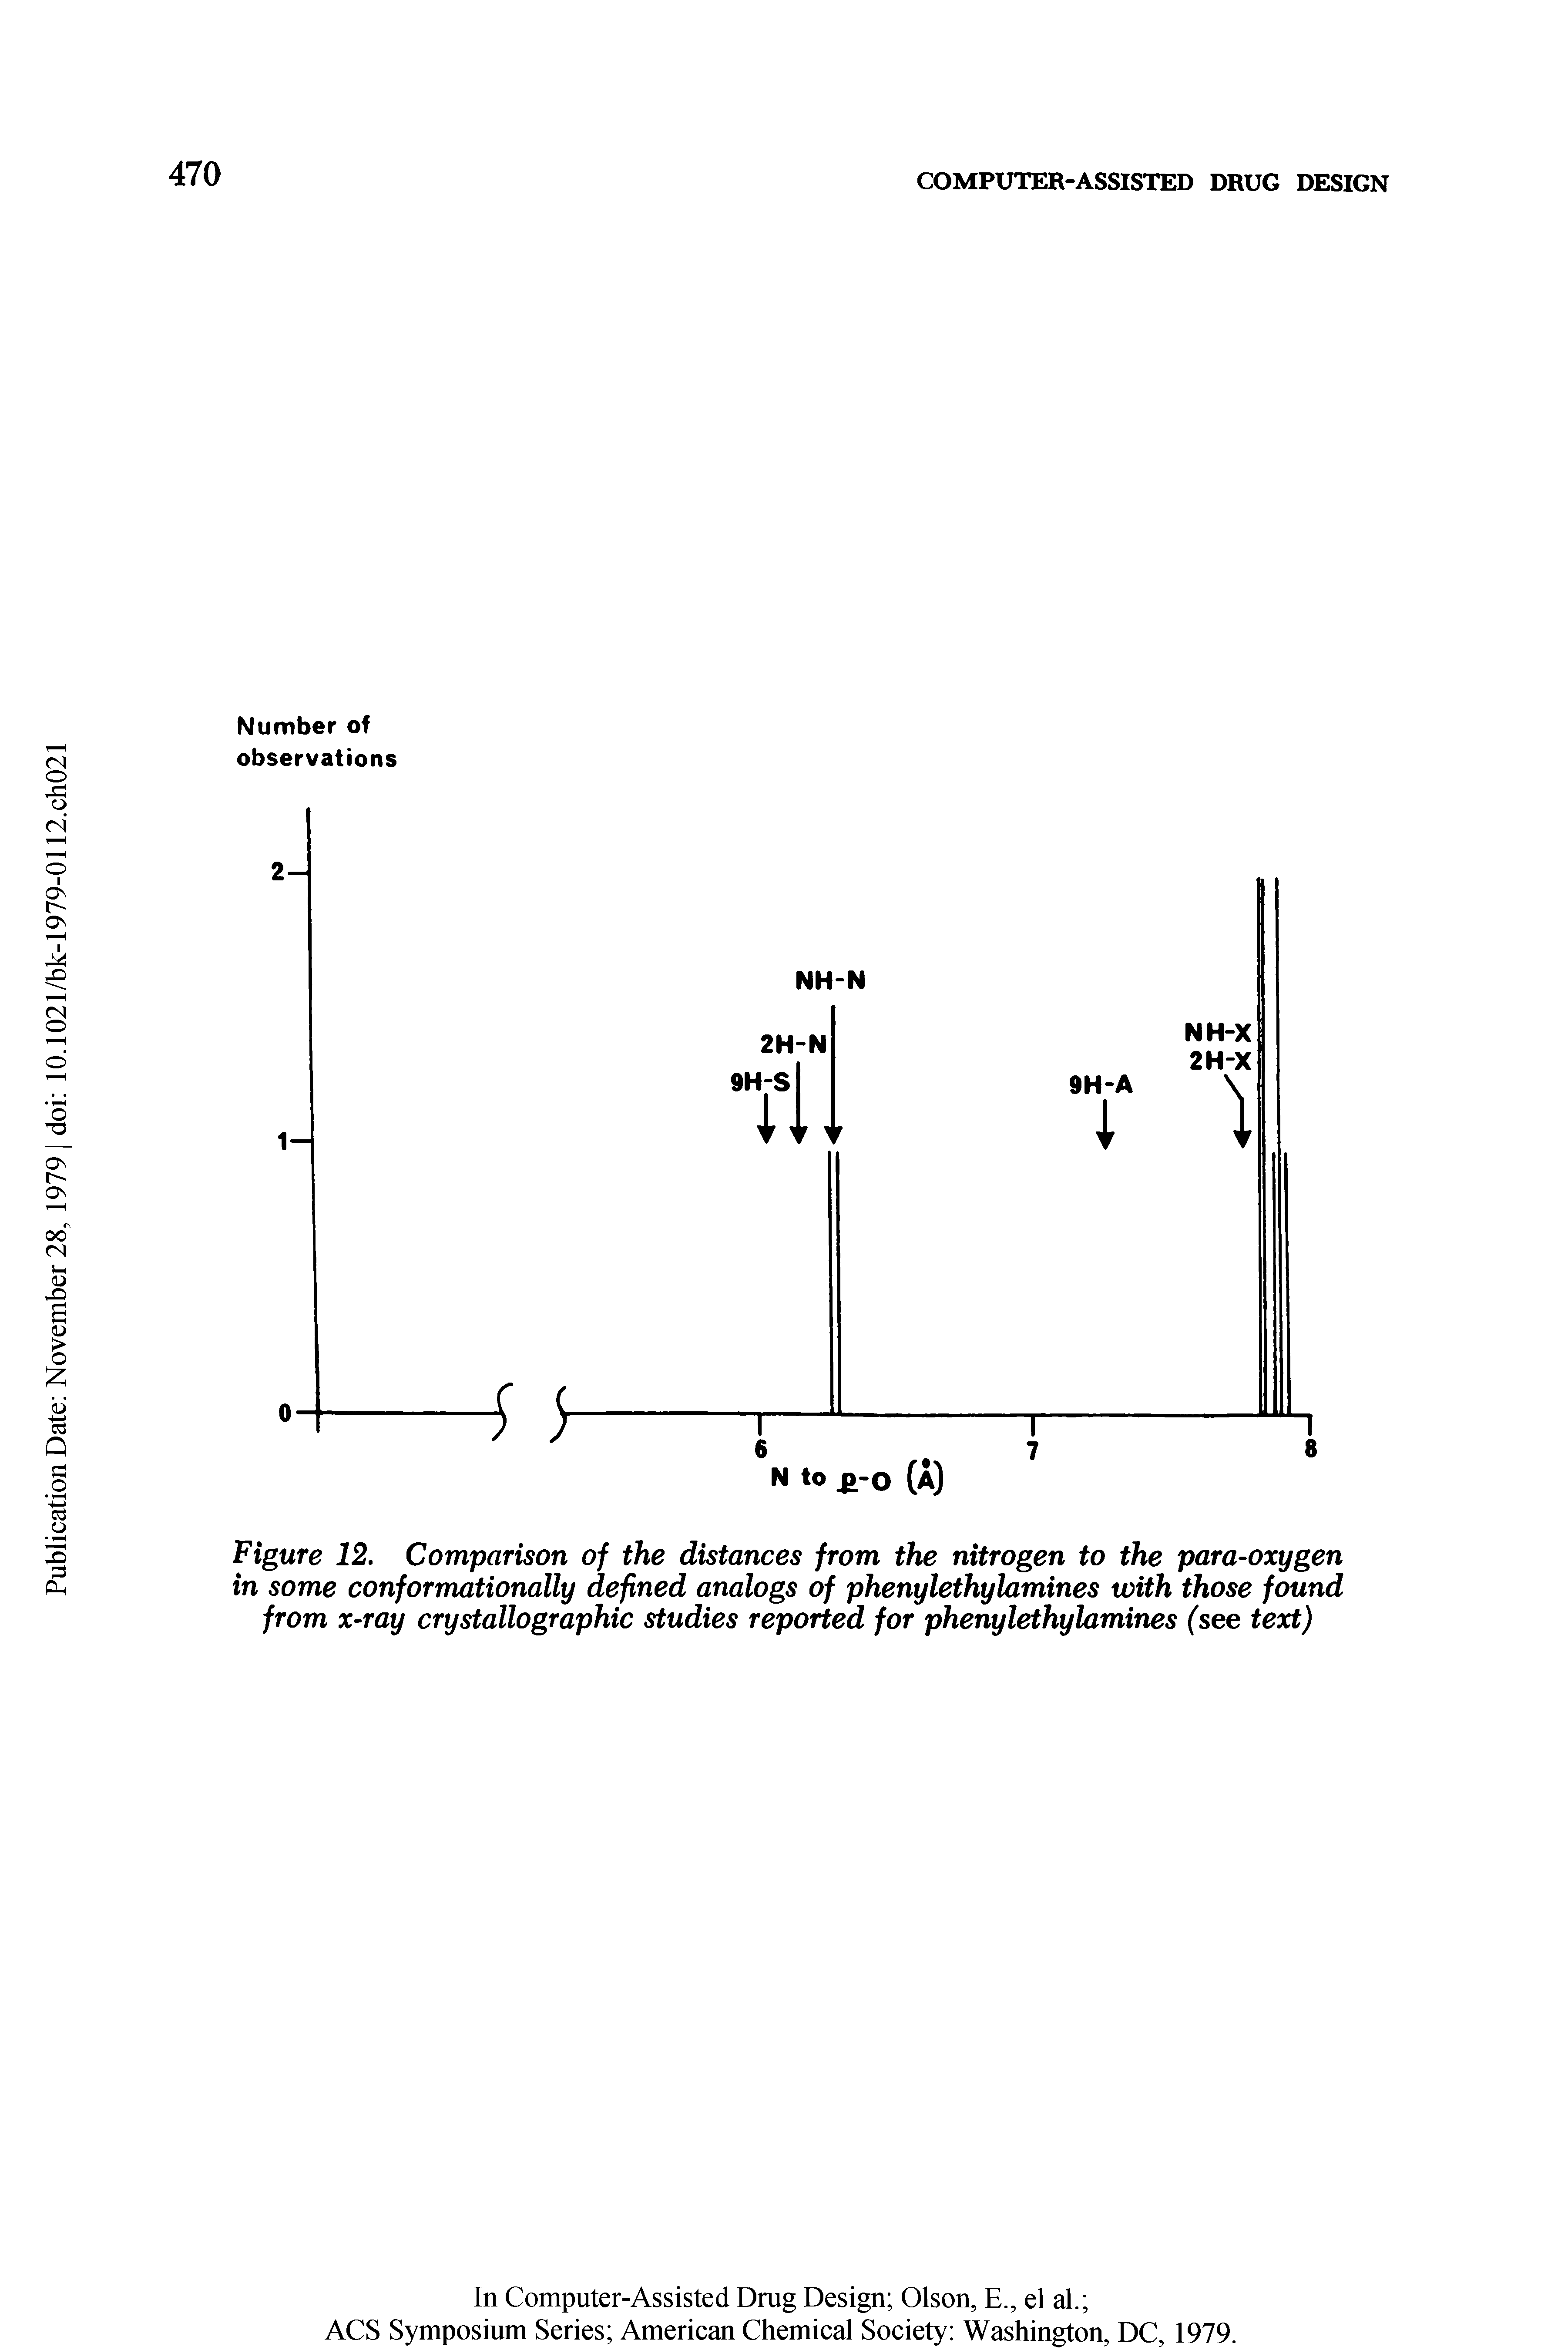 Figure 12. Comparison of the distances from the nitrogen to the para-oxygen in some conformationally defined analogs of phenylethylamines with those found from x-ray crystallographic studies reported for phenylethylamines (see text)...